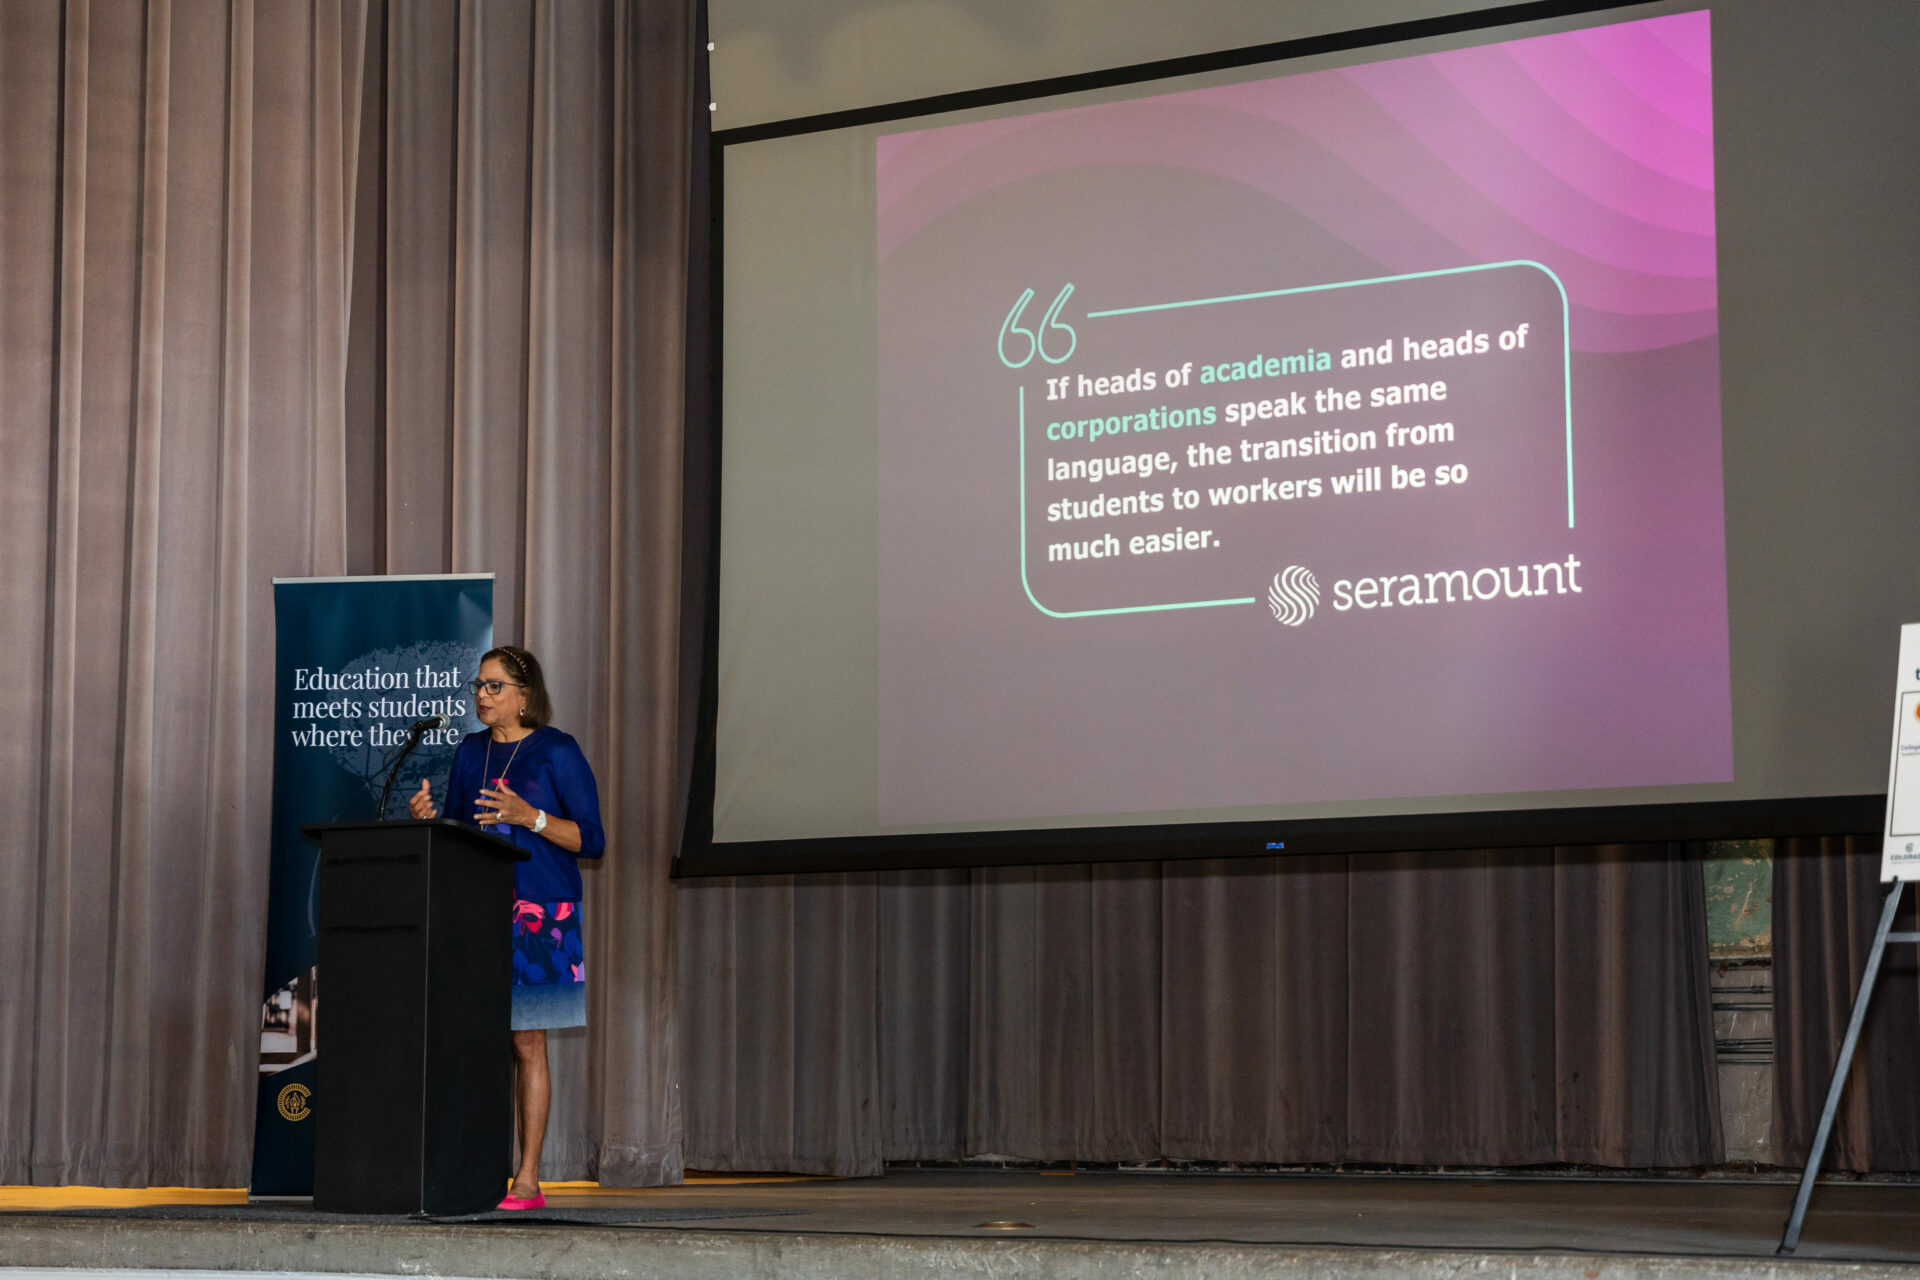 A speaker stands at a podium on a stage, delivering a presentation. Behind them, a large screen displays a quote about the importance of communication between academia and corporations for easing the transition from students to workers, attributed to 'seramount.' A banner to the left of the speaker reads, 'Education that meets students where they are.'